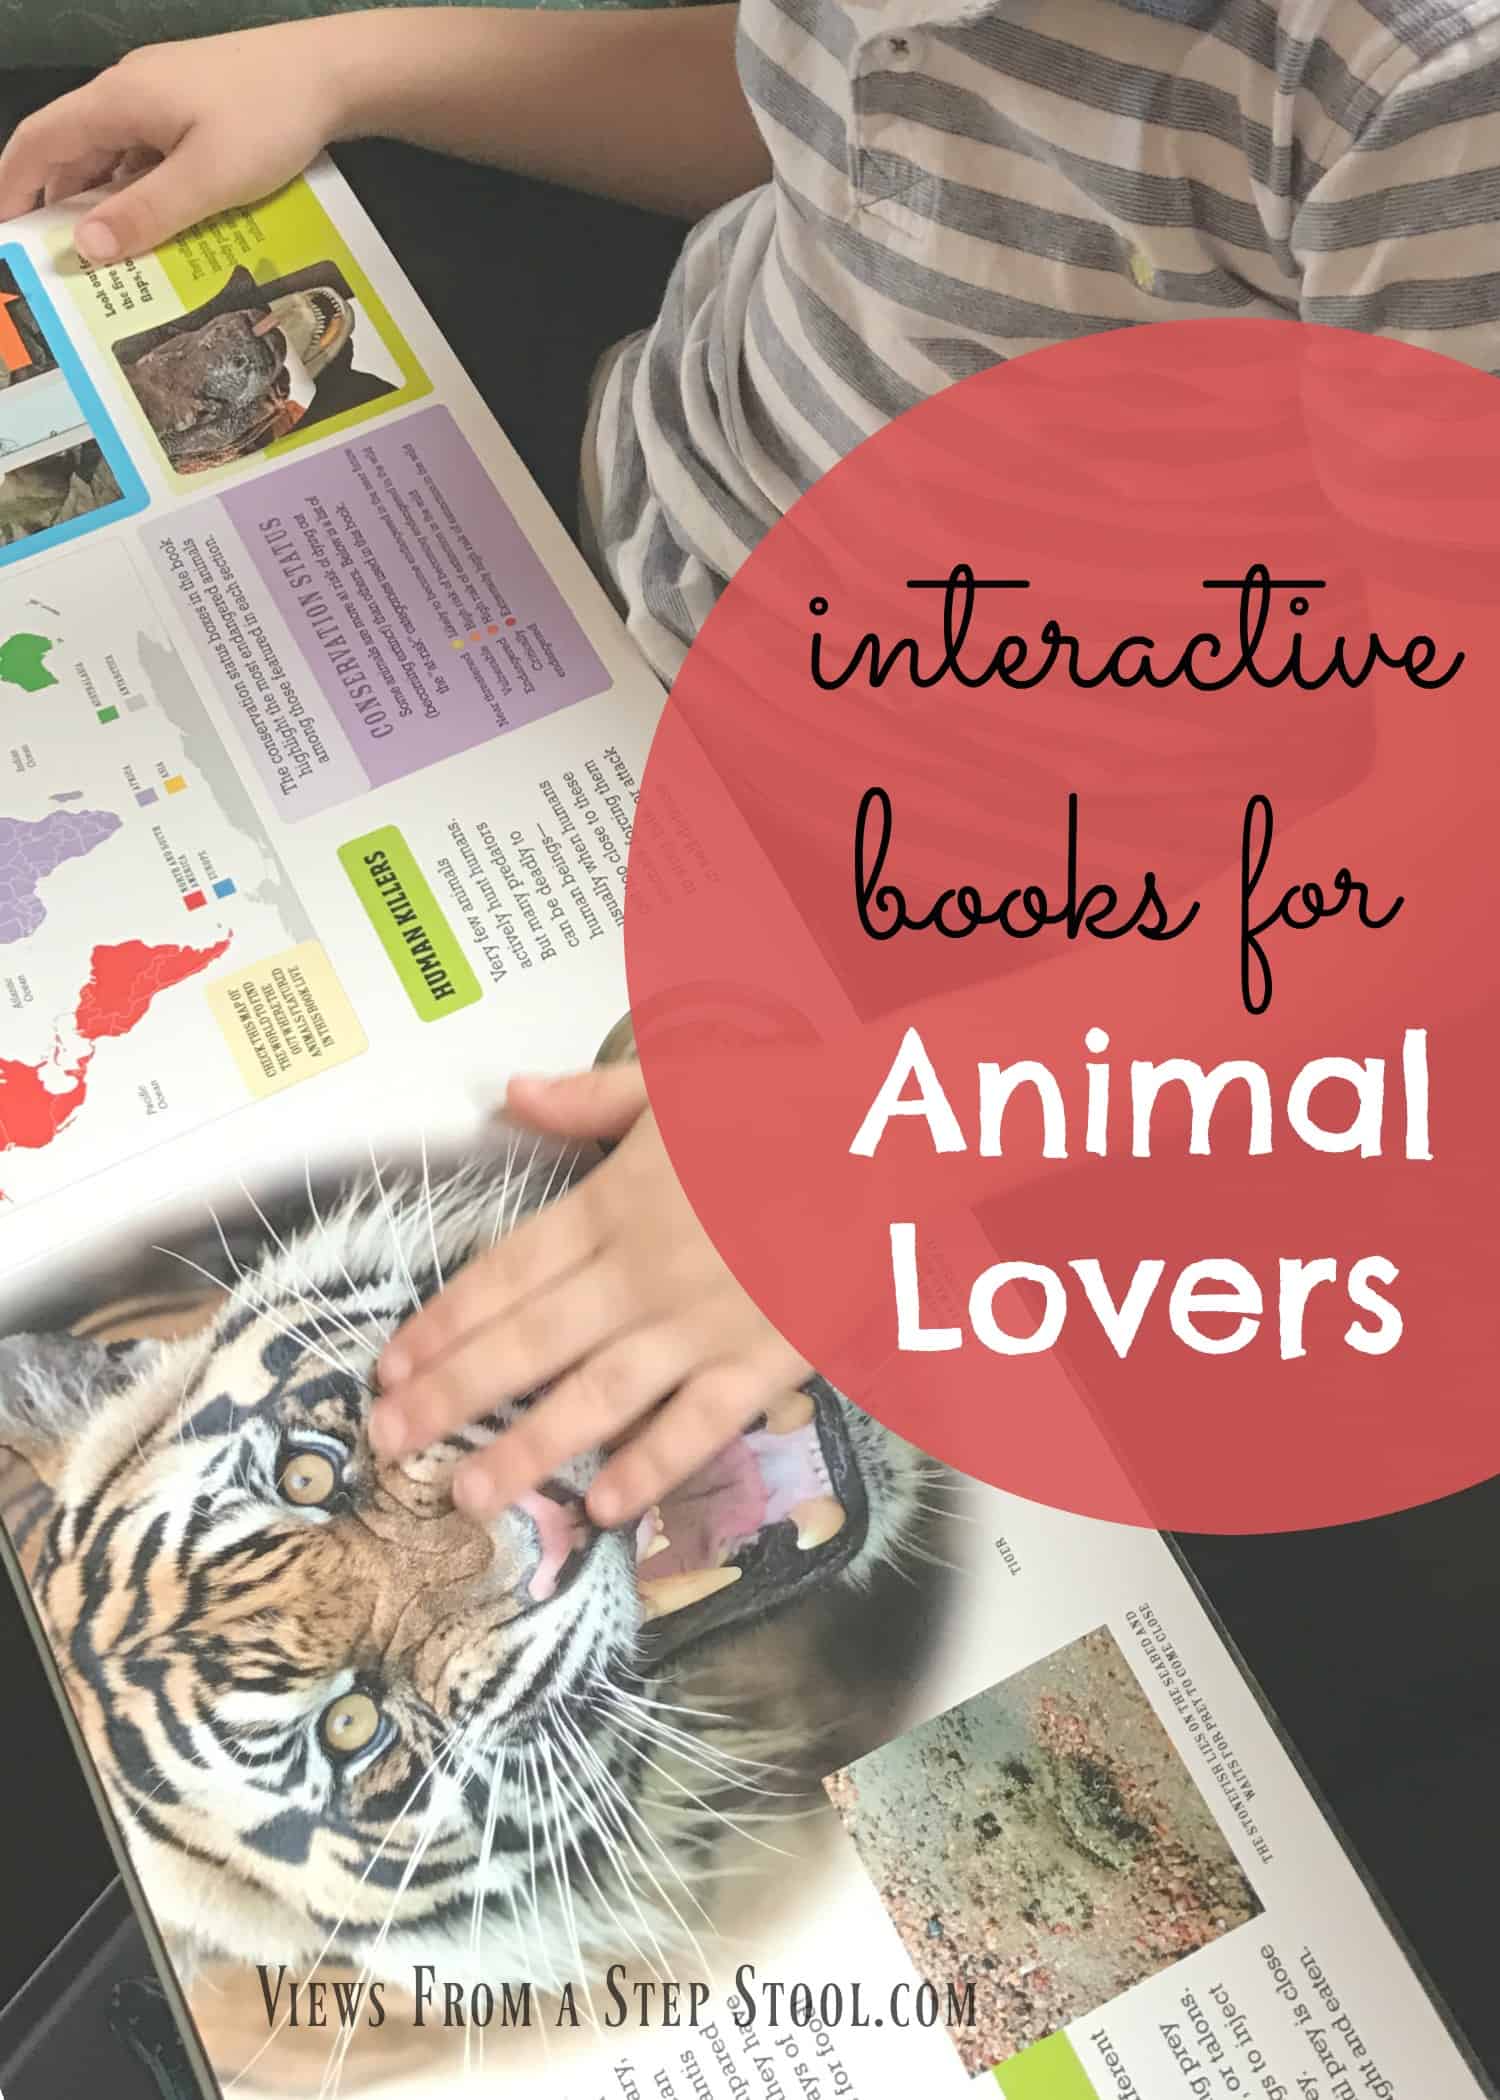 The Scanorama series is an amazing series of interactive books for animal lovers. They provide fun learning and an up-close view of awesome animals.